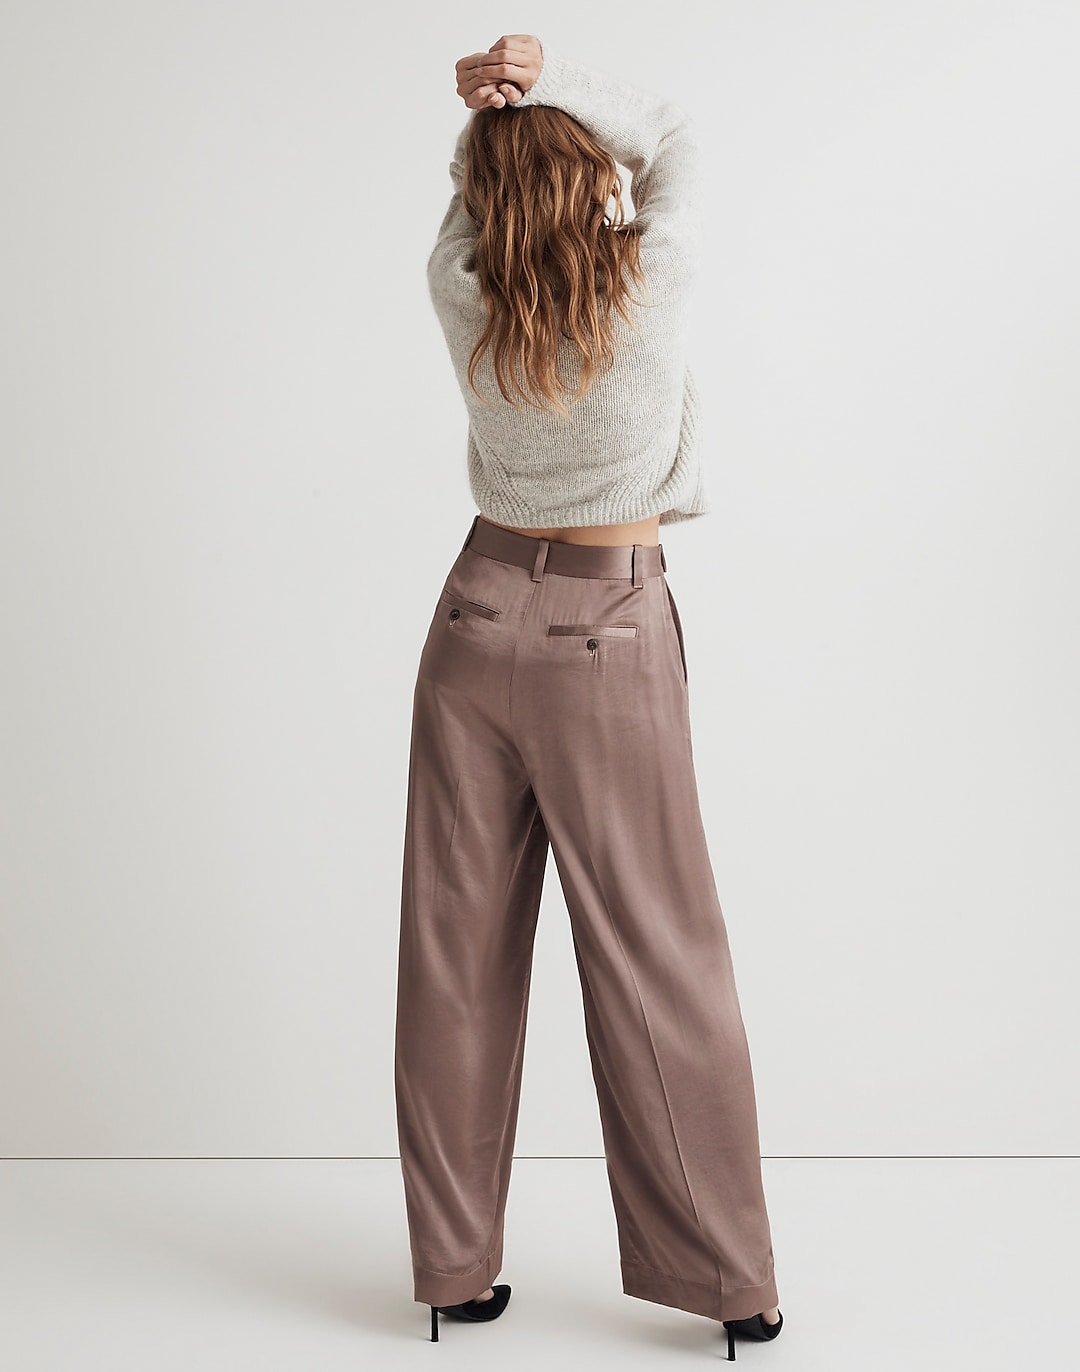 The Harlow Wide-Leg Pant in Satin | Madewell